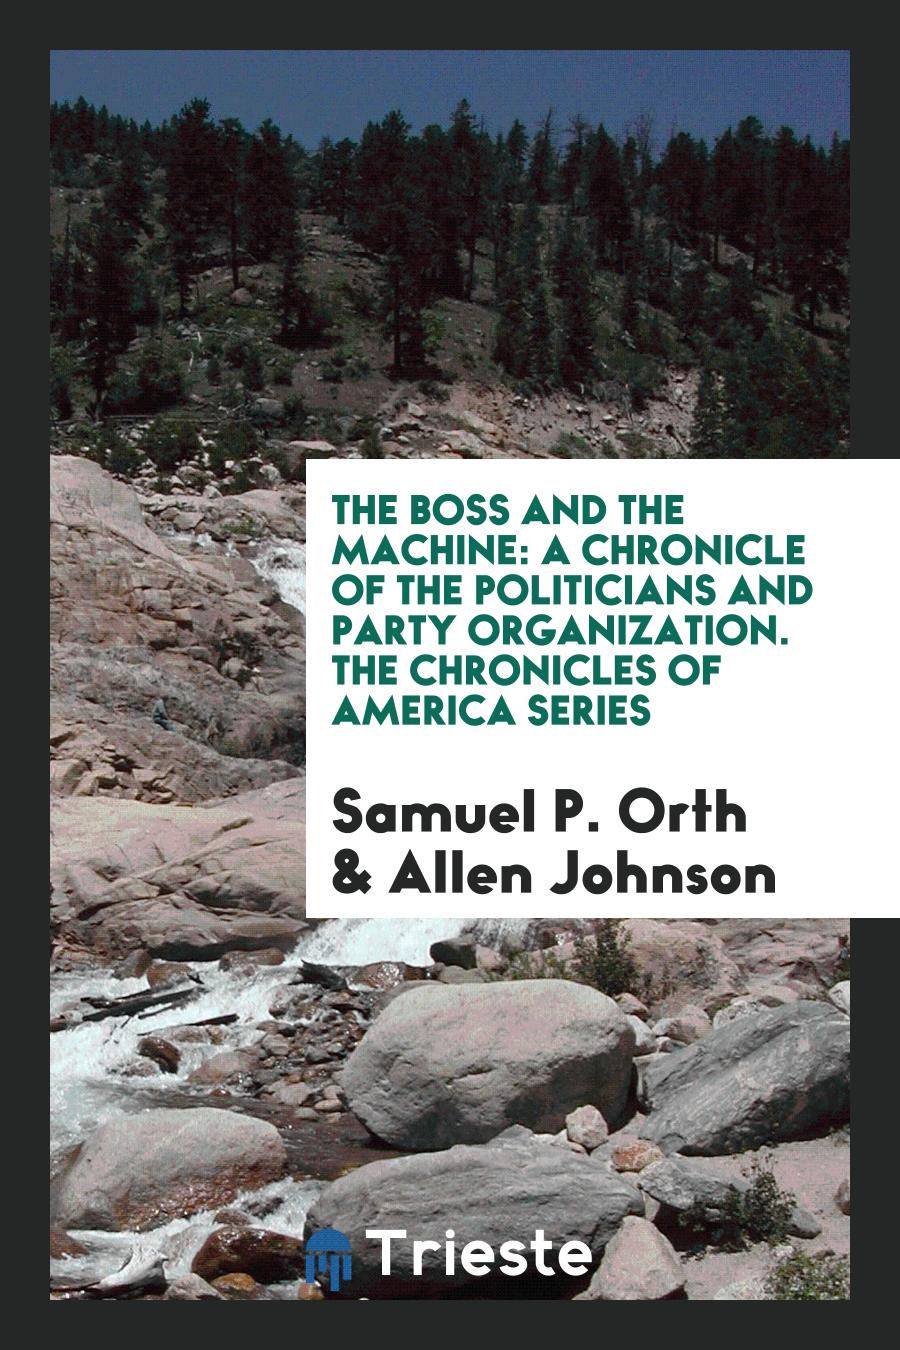 The Boss and the Machine: A Chronicle of the Politicians and Party Organization. The Chronicles of America Series